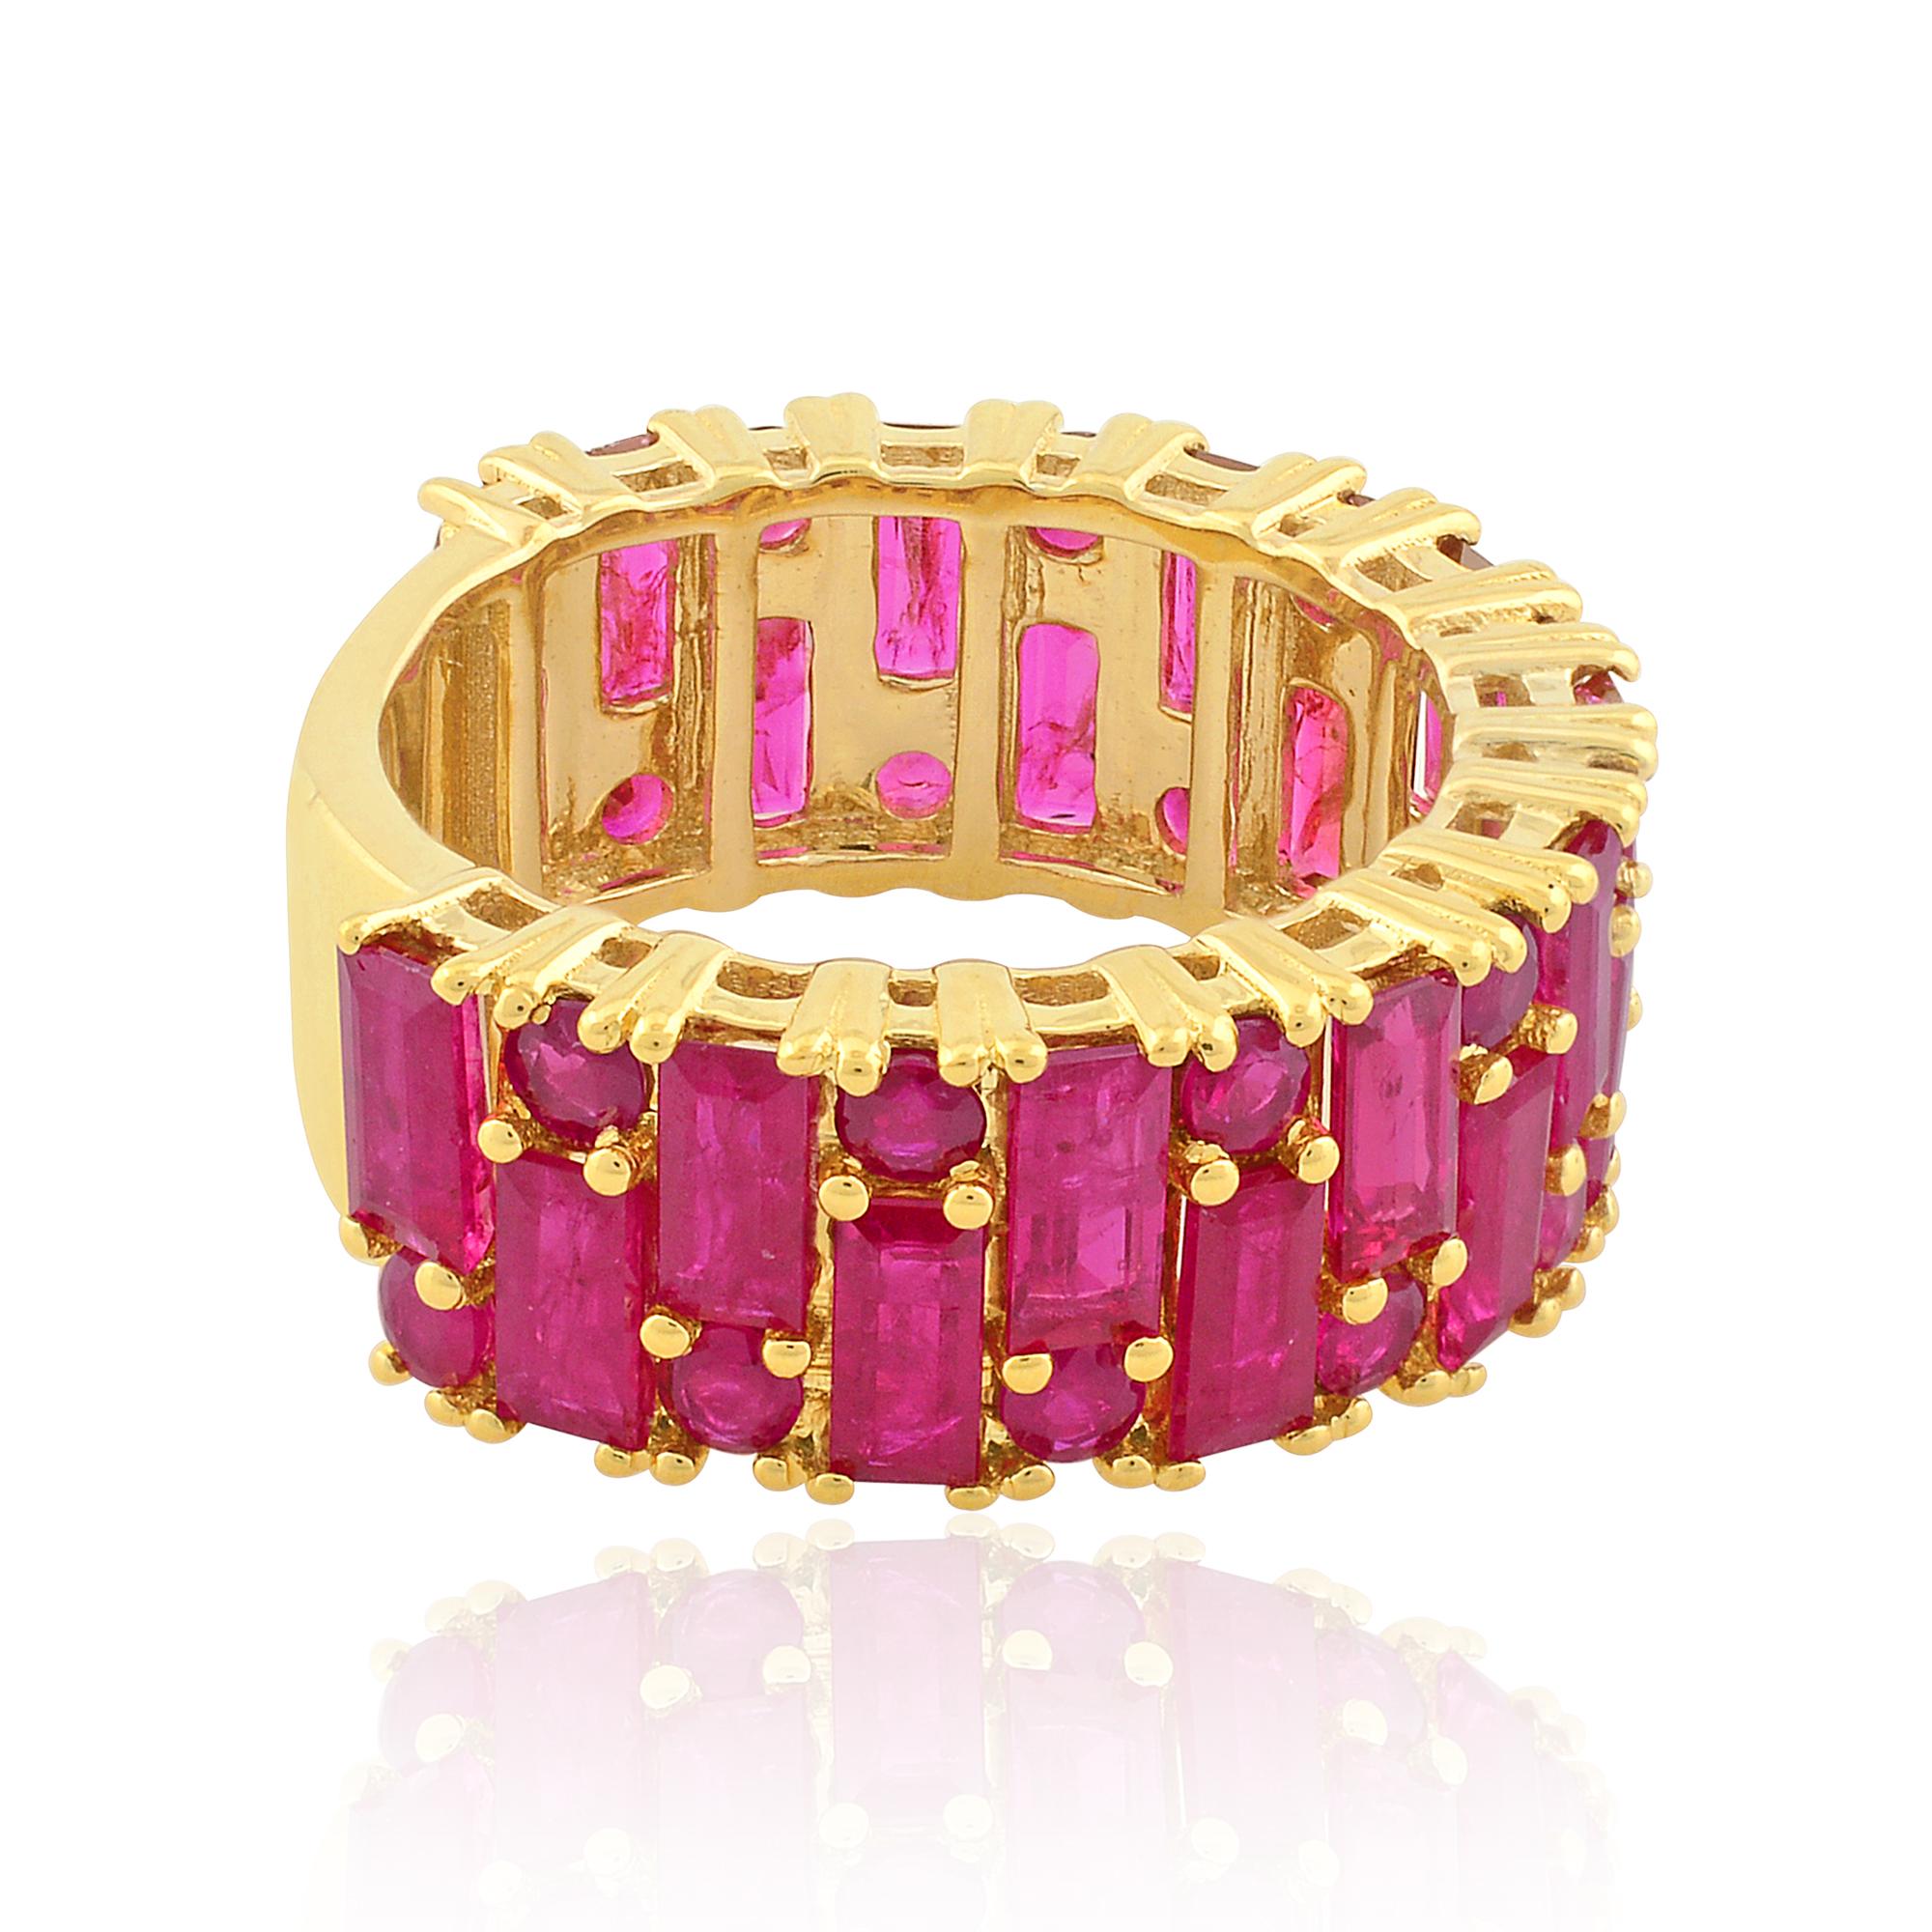 Item Code :- SER-2568
Gross Weight :- 7.67 gm
18k Yellow Gold Weight :- 6.52 gm
Ruby Weight :- 5.76 carat
Ring Size :- 7 US & All ring size available

✦ Sizing
.....................
We can adjust most items to fit your sizing preferences. Most items